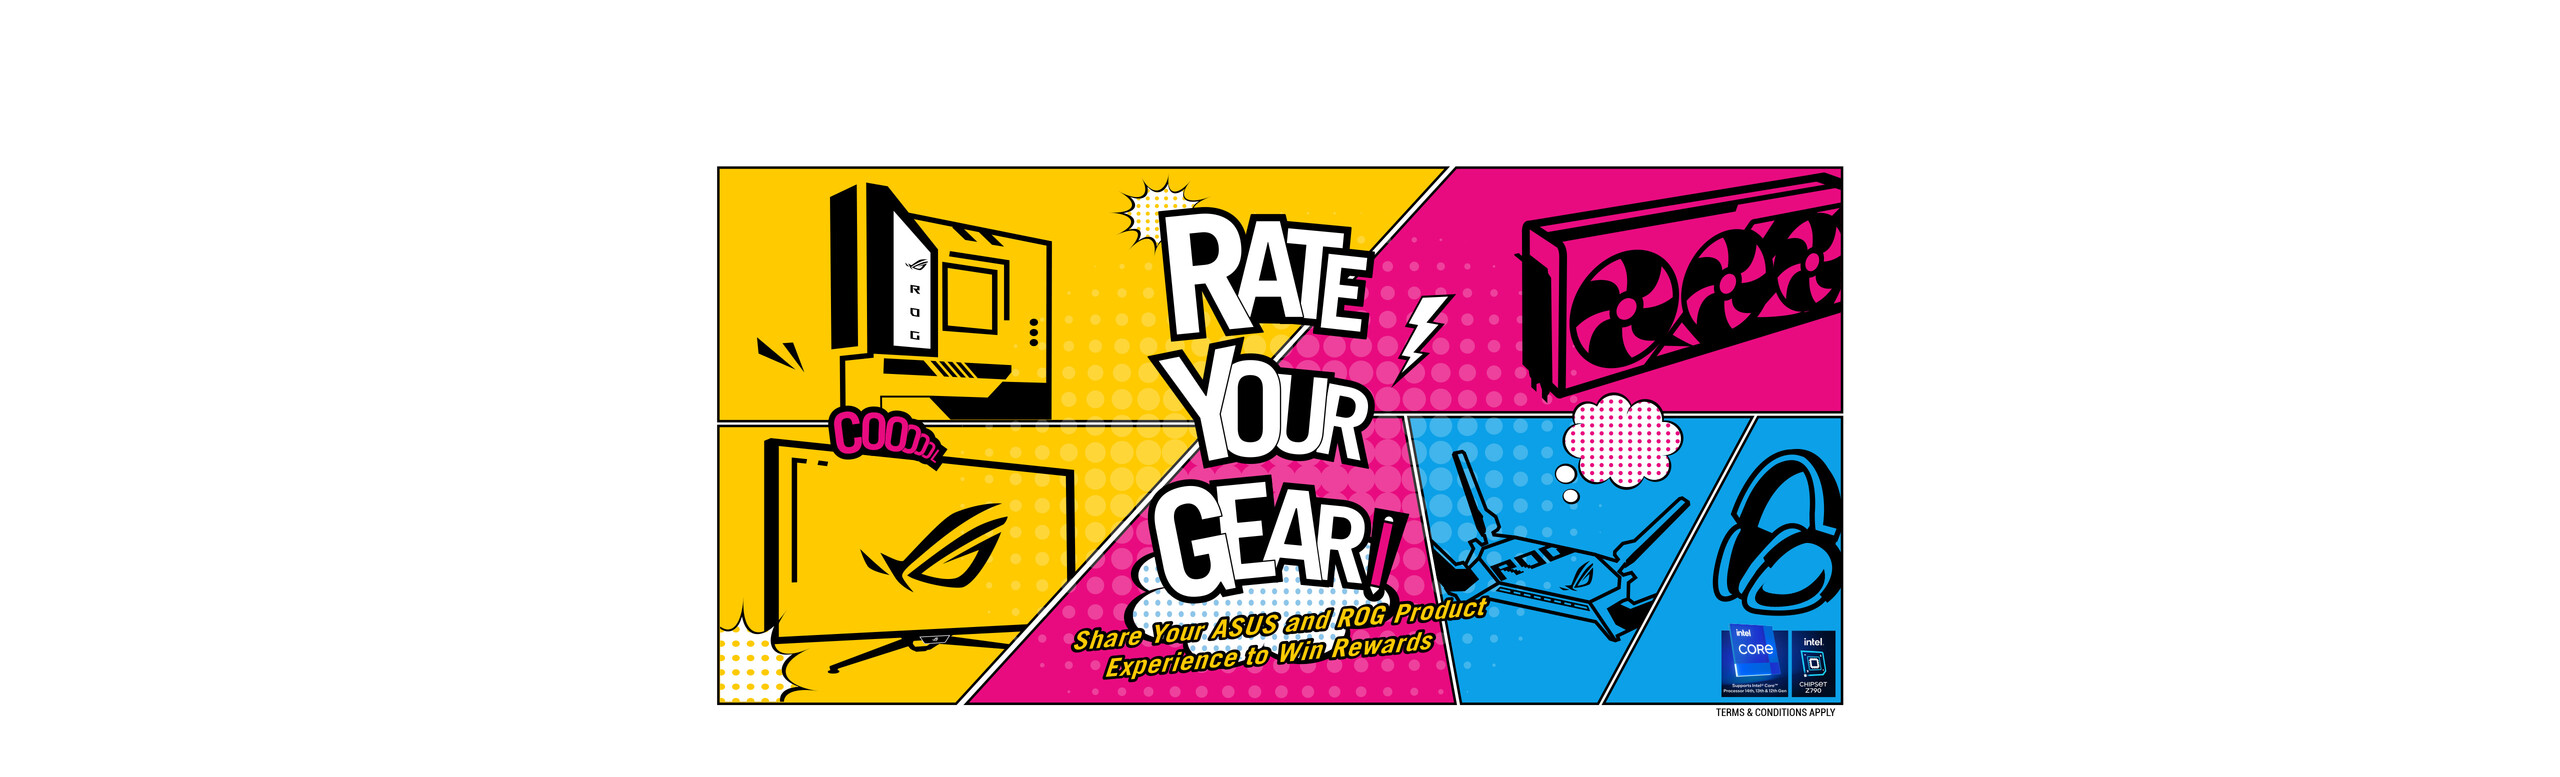 rate your gear campaign banner in comic style including motherboard, graphics card, monitor, router and headset with Intel badge on the bottom